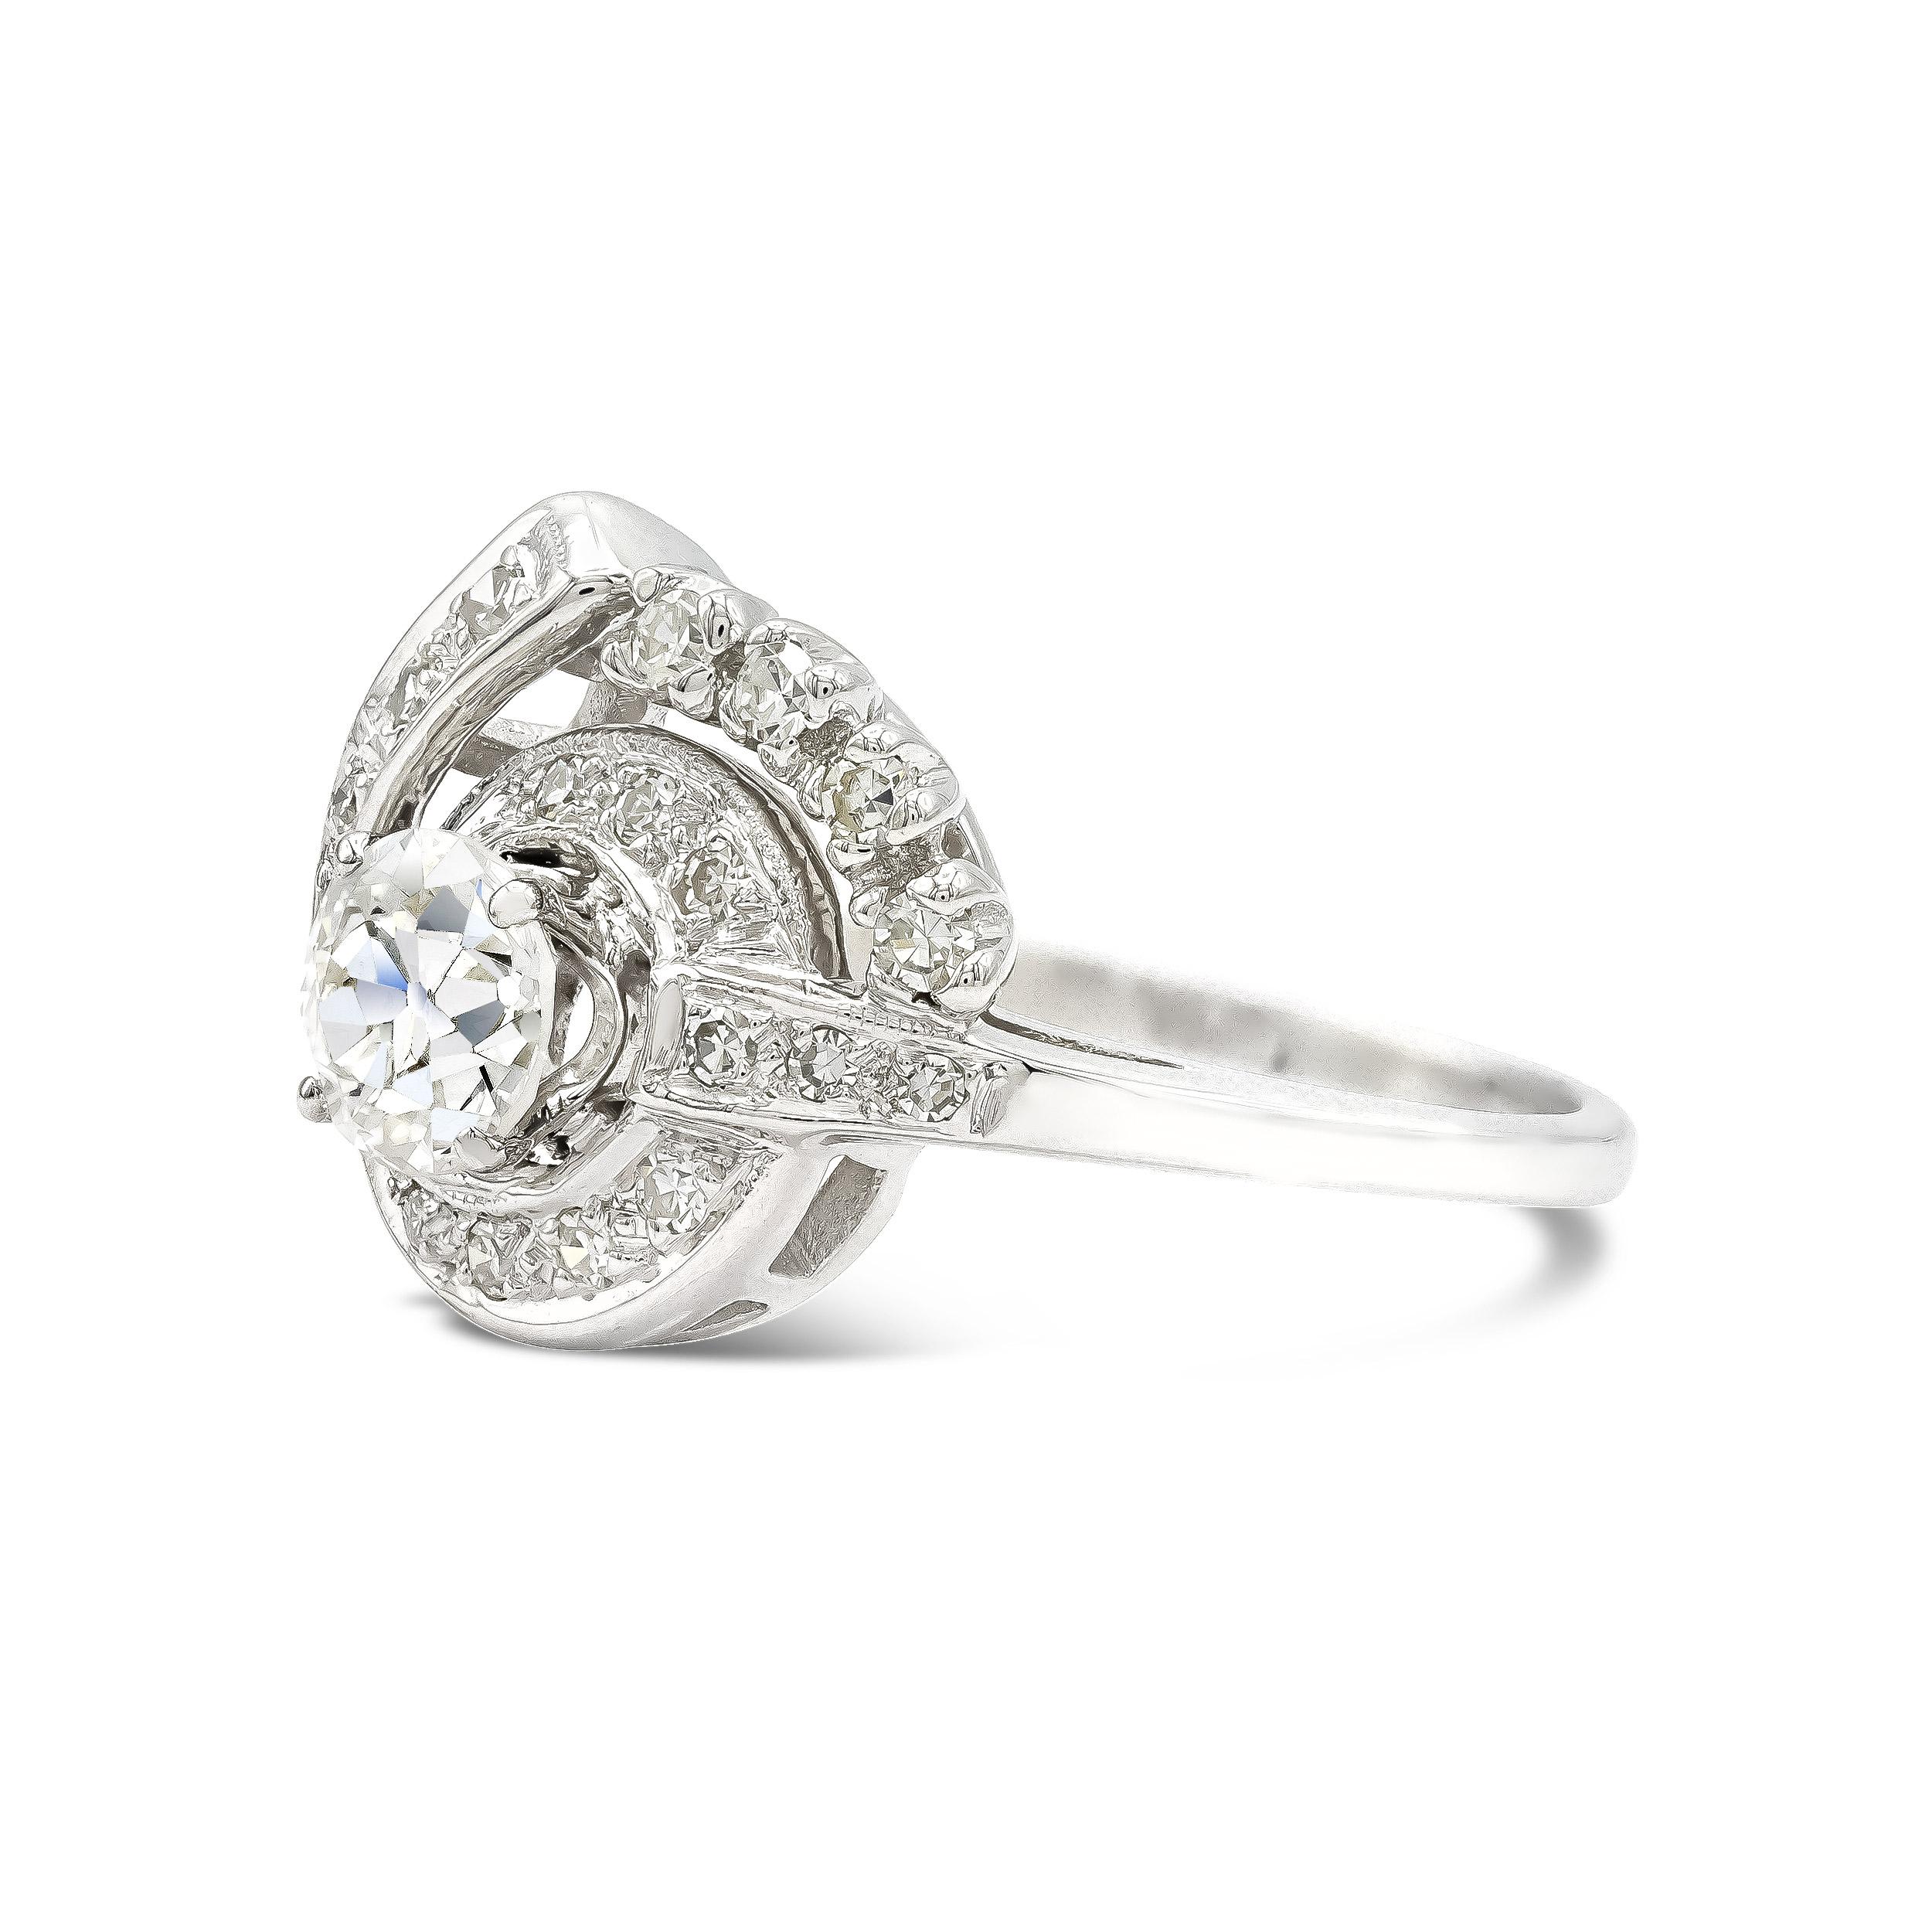 Here's a uniquely designed engagement with the kind of style and jazz you would only find with a vintage piece. Centered with an enticing 0.72 carat old European cut among a sea of single cut diamond accents this ring really sparkles.

Diamond